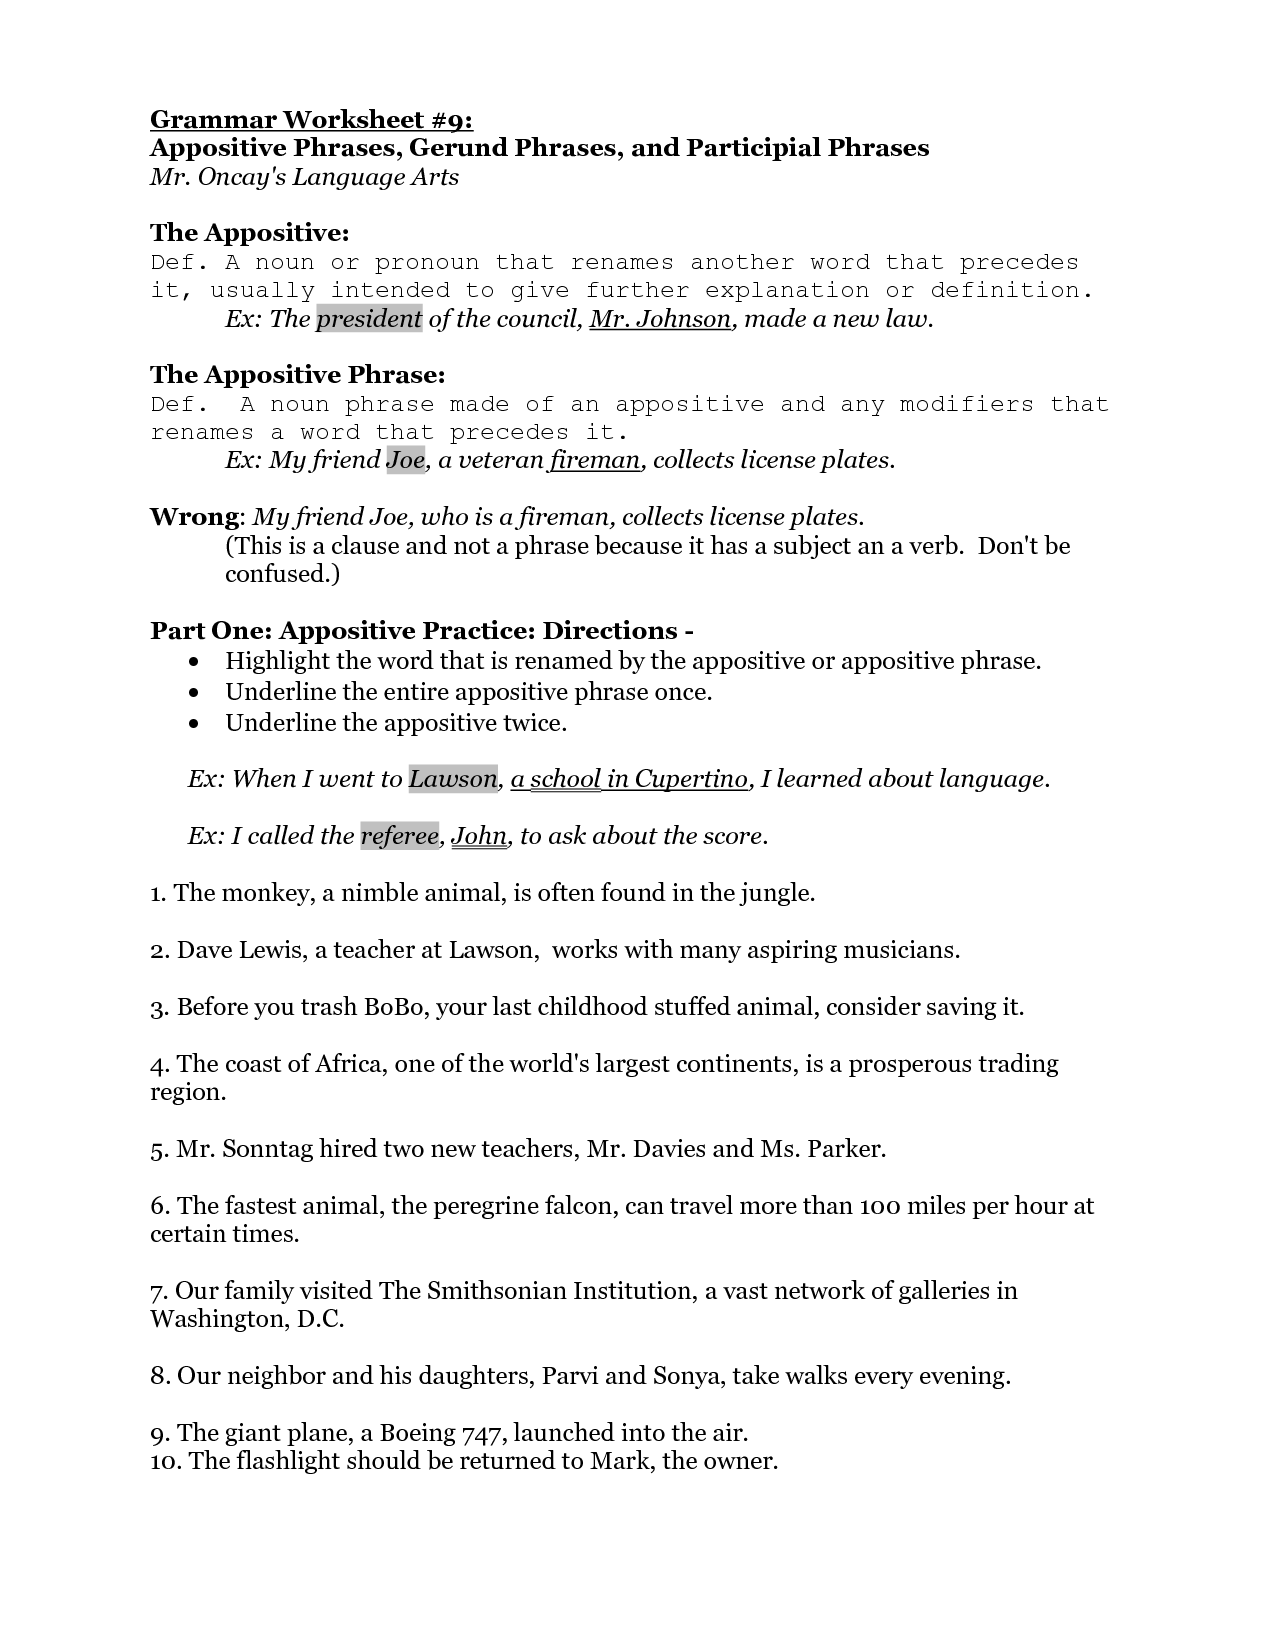 Infinitive And Participle Phrases Worksheet